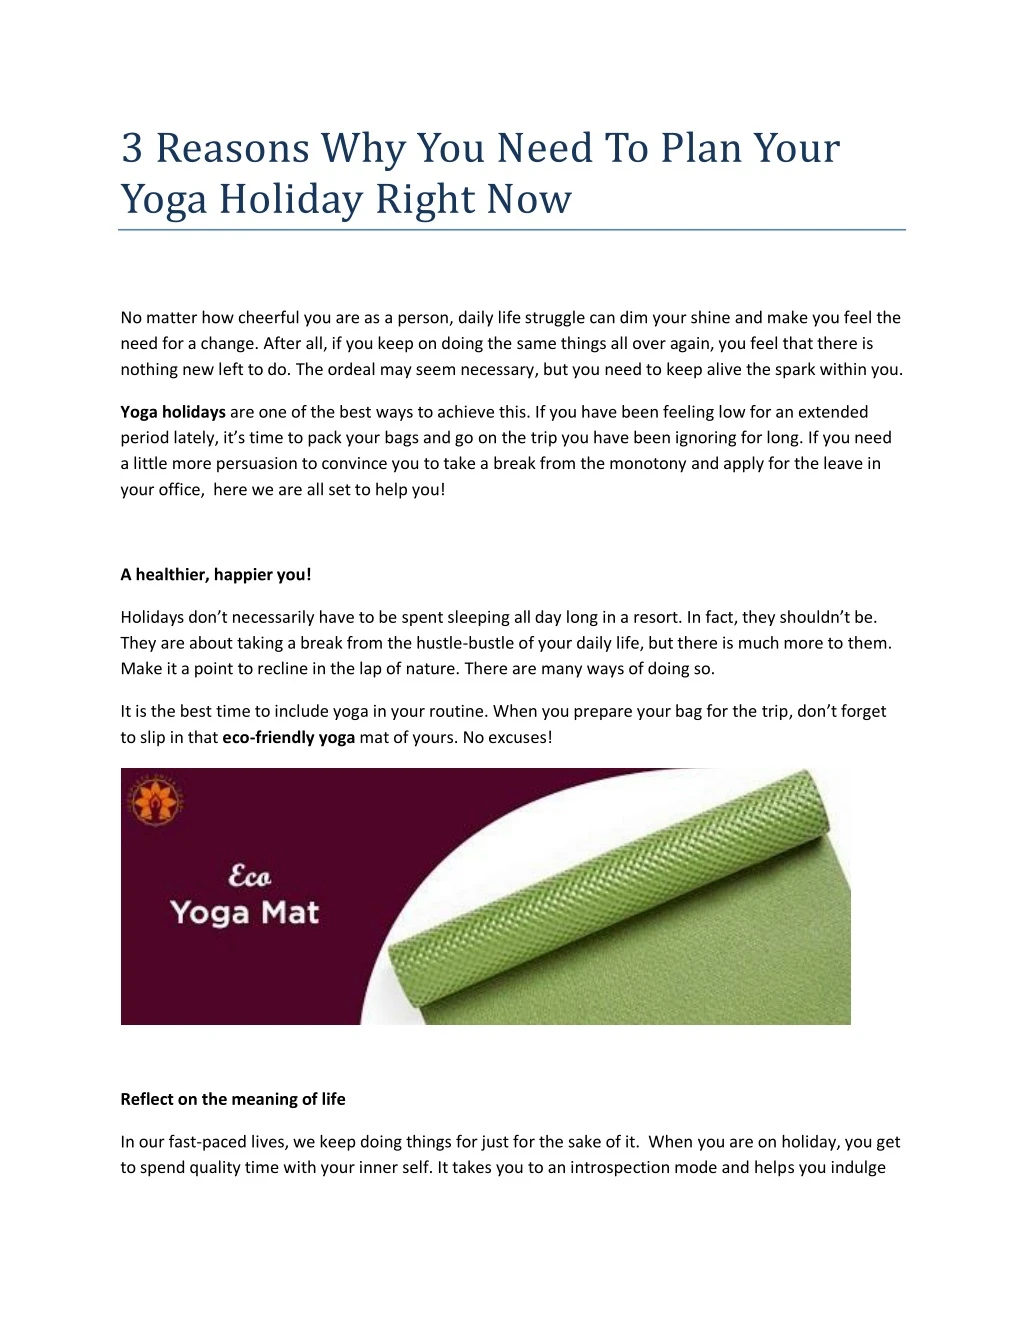 3 reasons why you need to plan your yoga holiday